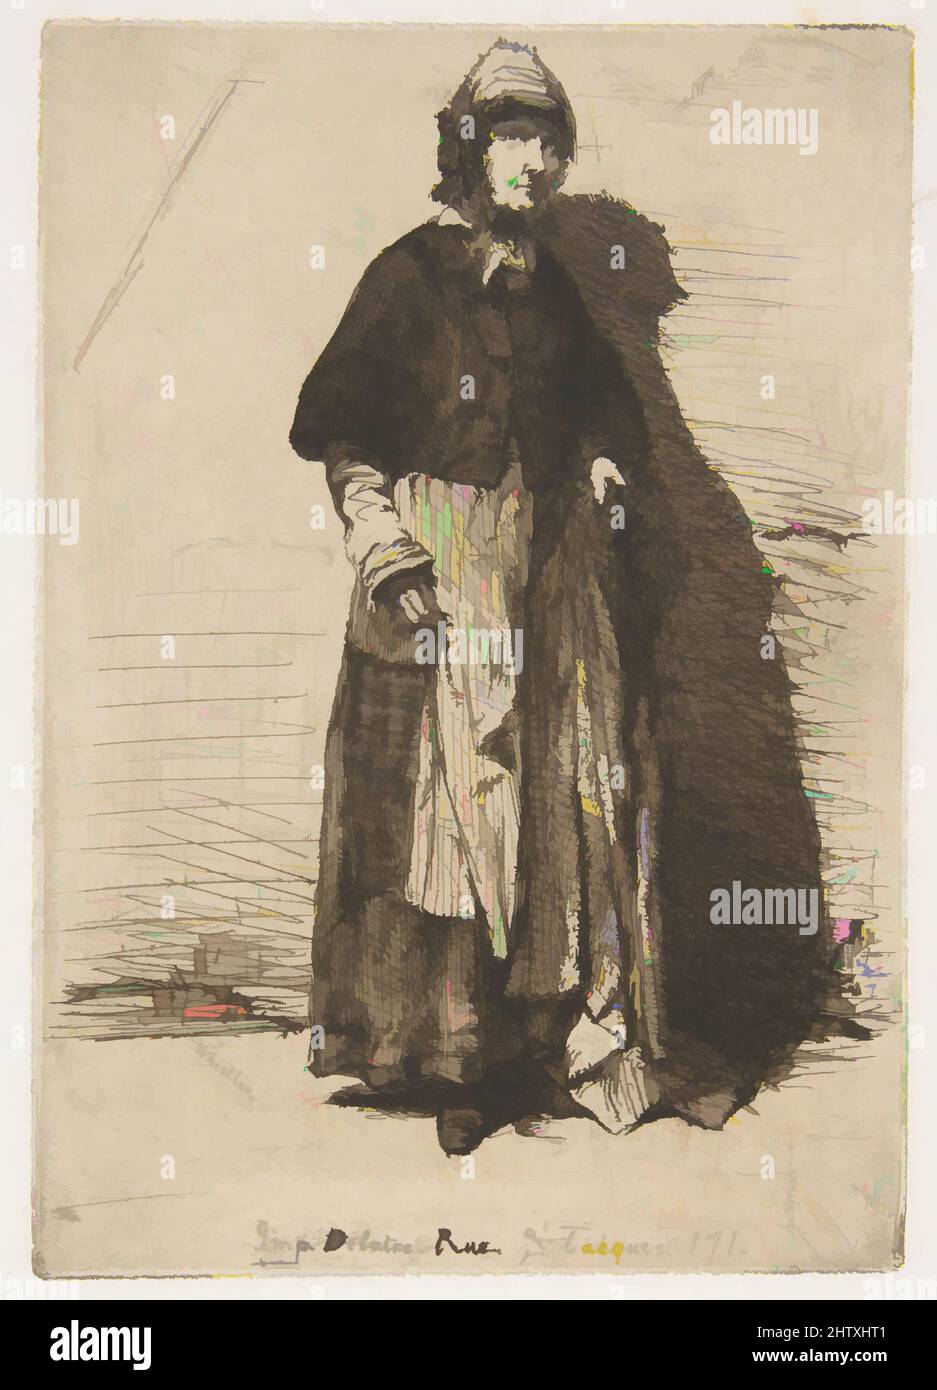 Art inspired by La Mère Gérard, 1858, Etching; fourth state of four (Glasgow); printed in black ink on brownish-gray chine on off-white wove paper (chine collé), Plate: 5 × 3 9/16 in. (12.7 × 9 cm), Prints, James McNeill Whistler (American, Lowell, Massachusetts 1834–1903 London, Classic works modernized by Artotop with a splash of modernity. Shapes, color and value, eye-catching visual impact on art. Emotions through freedom of artworks in a contemporary way. A timeless message pursuing a wildly creative new direction. Artists turning to the digital medium and creating the Artotop NFT Stock Photo